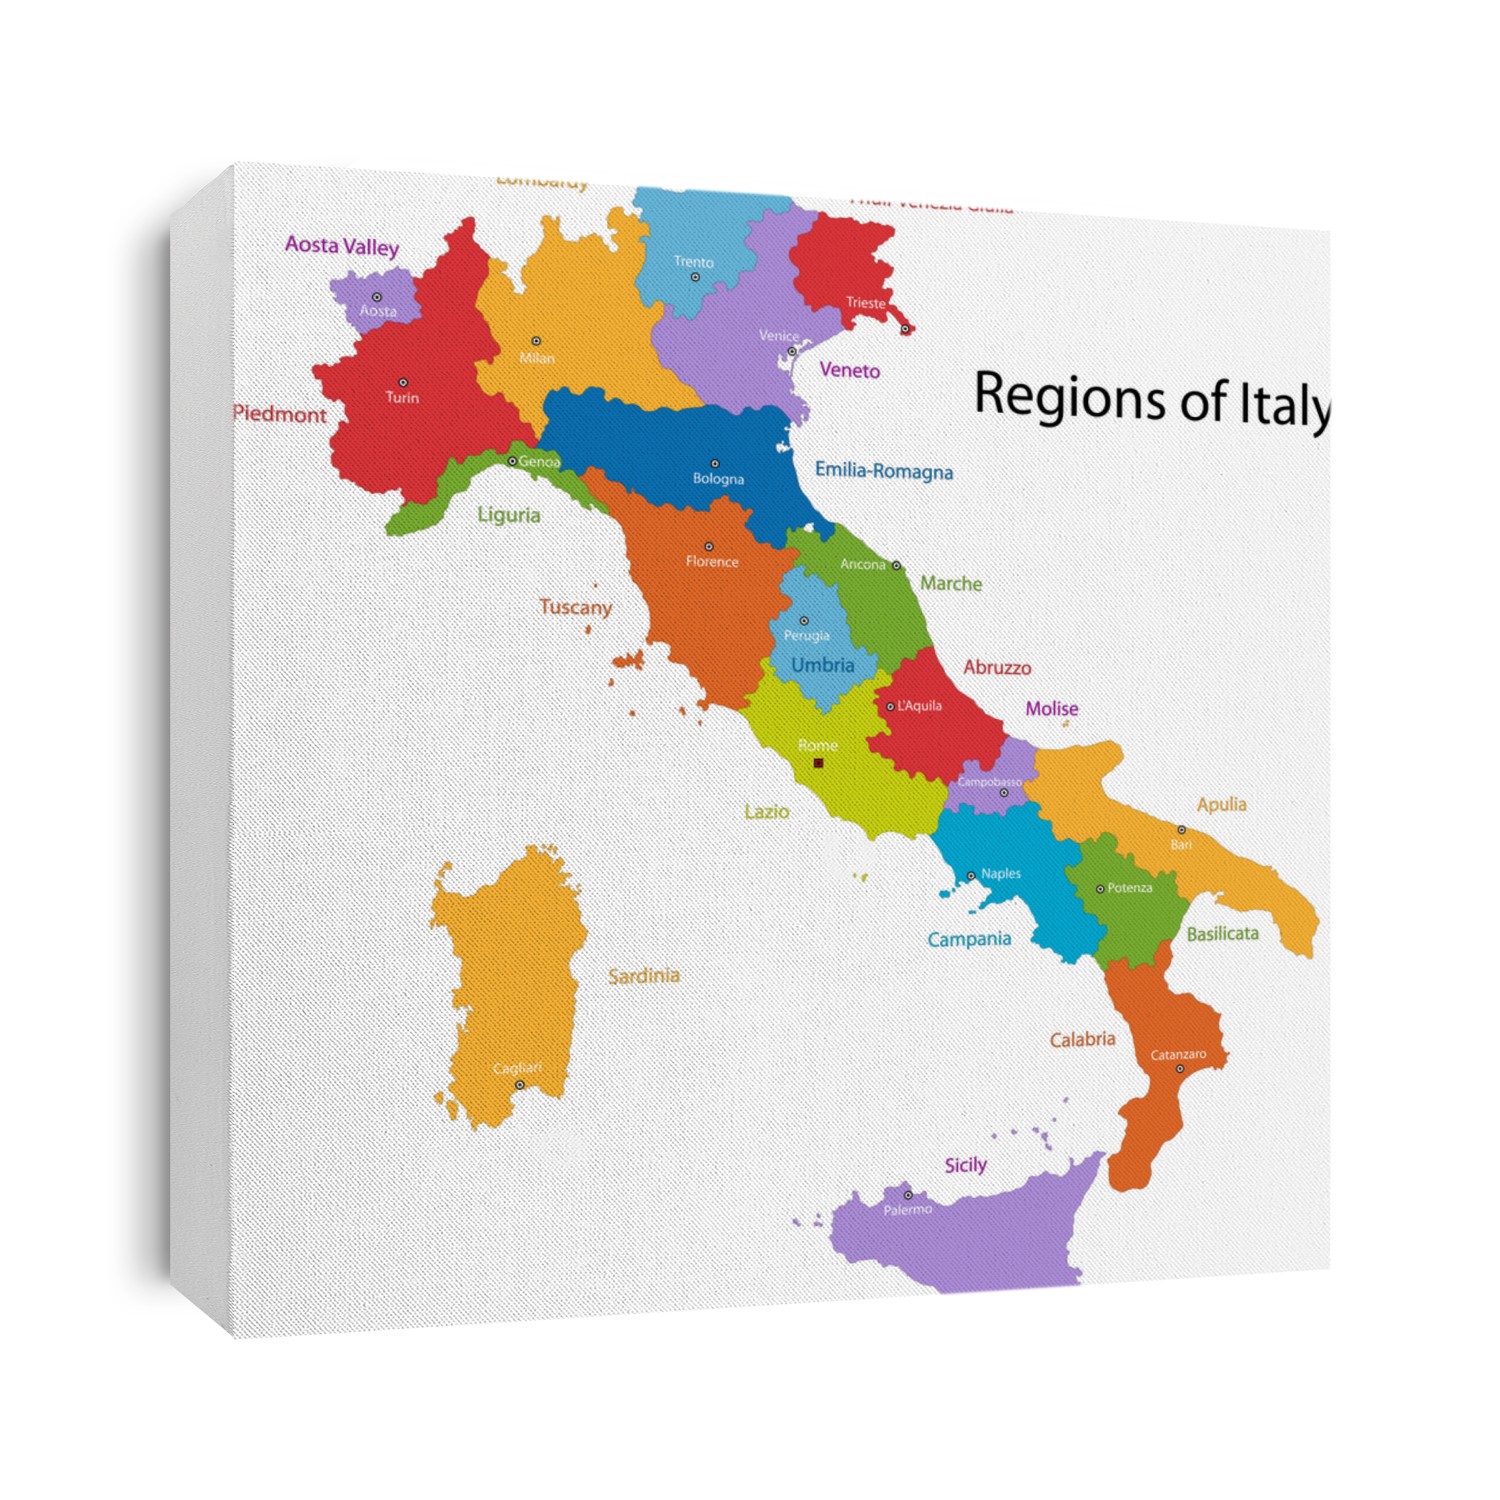 Colorful Italy map with regions and main cities